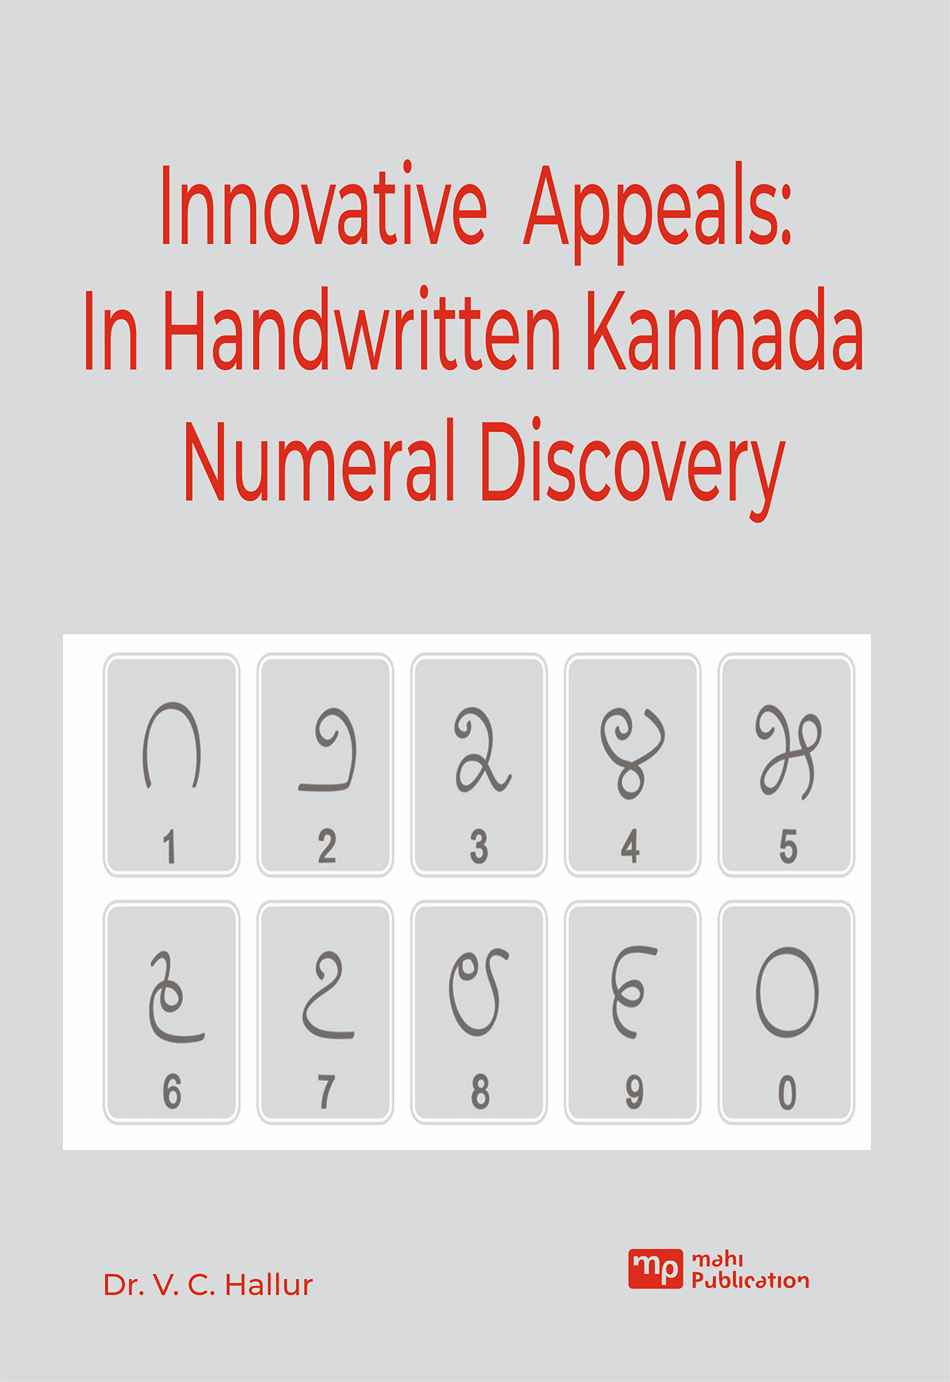 Innovative Appeals: In Handwritten Kannada Numeral Discovery